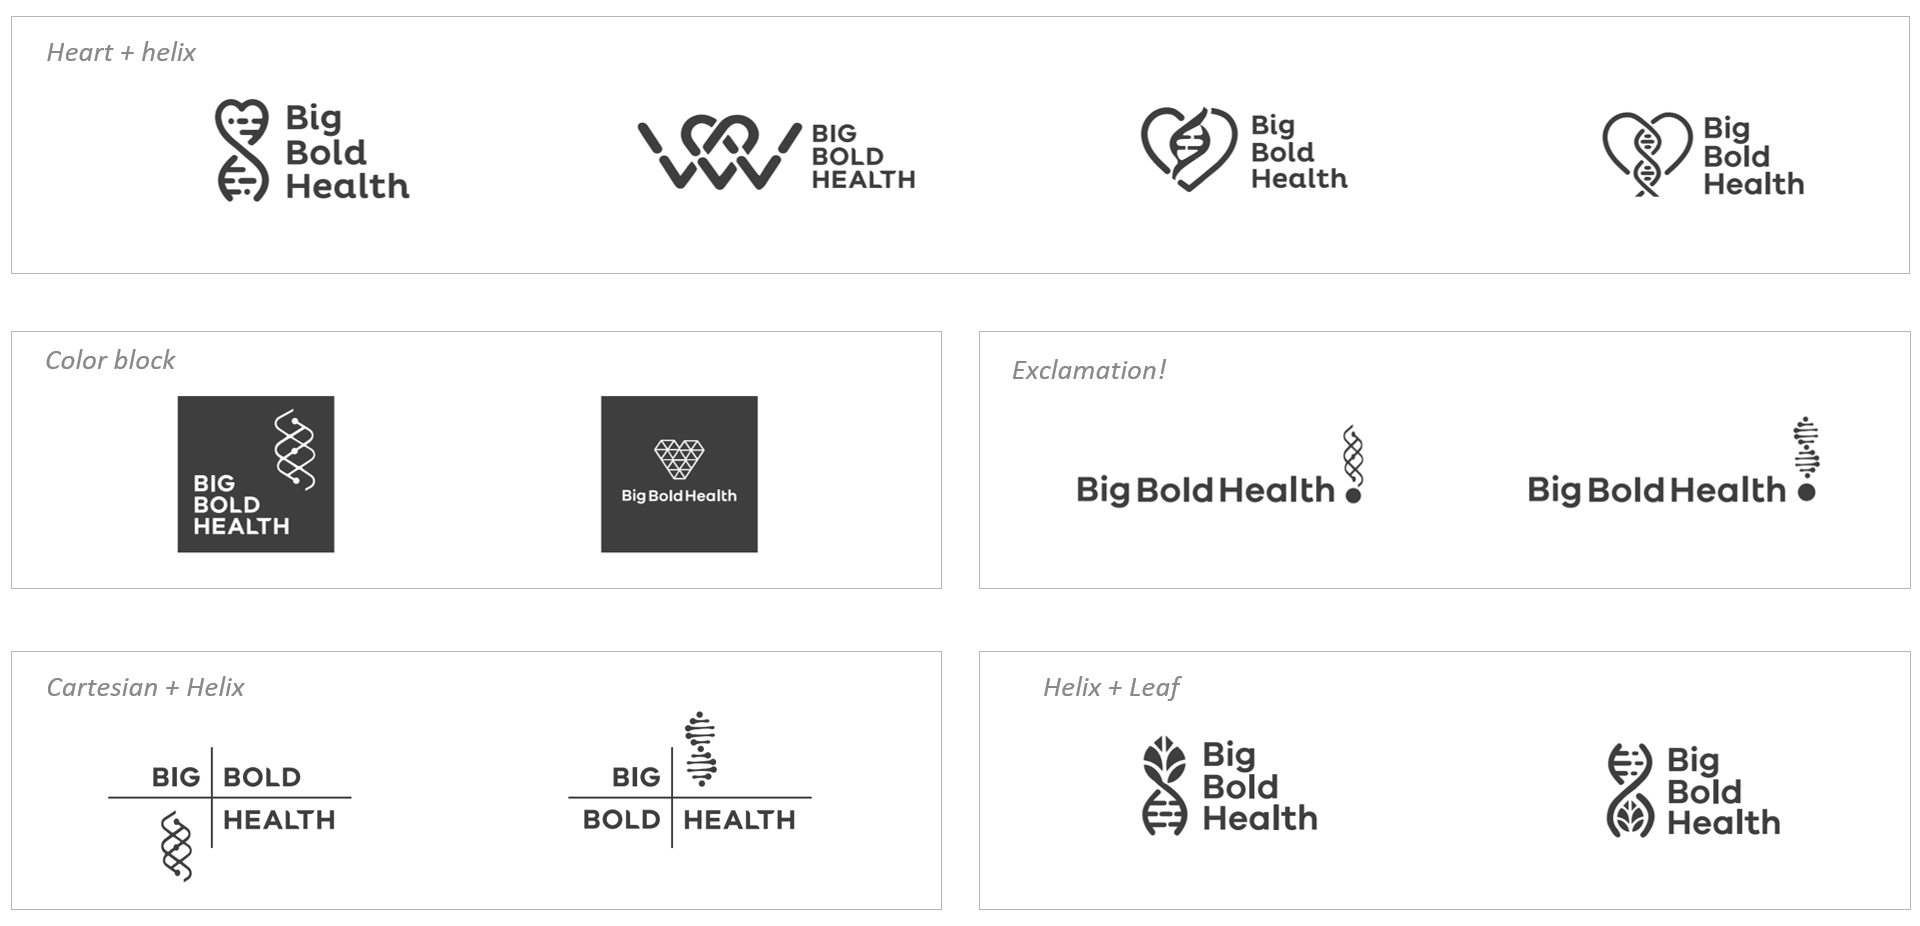 Five design concepts with twelve iterations for possible logos.